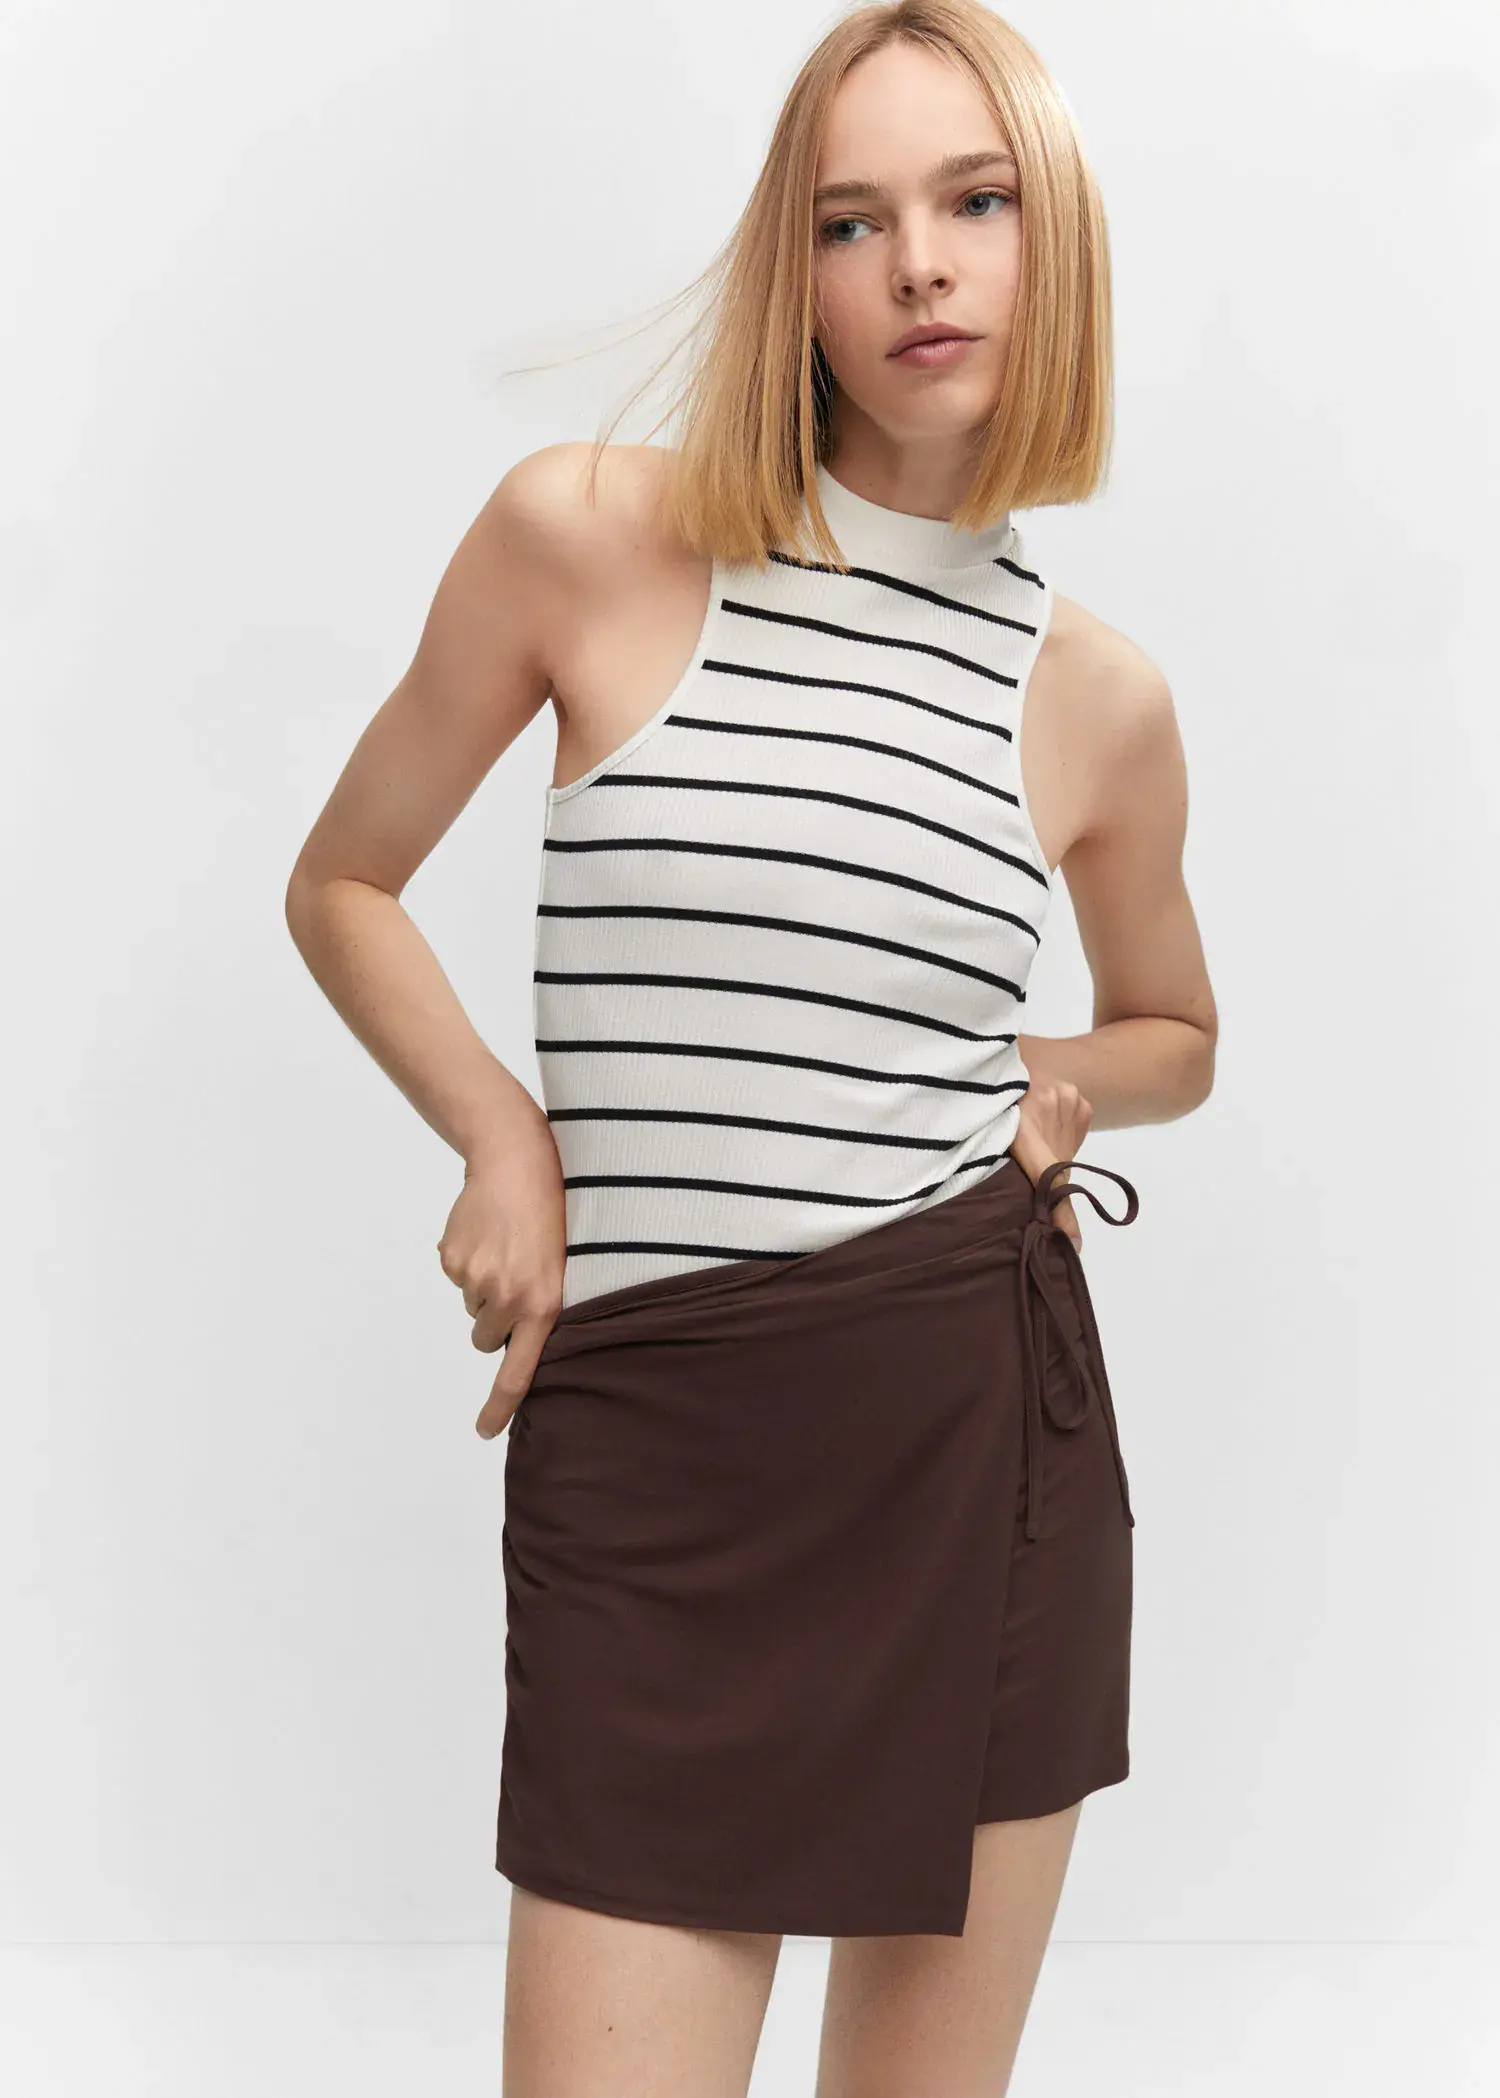 Mango Bow wrap skirt. a woman in a striped top and a brown skirt. 